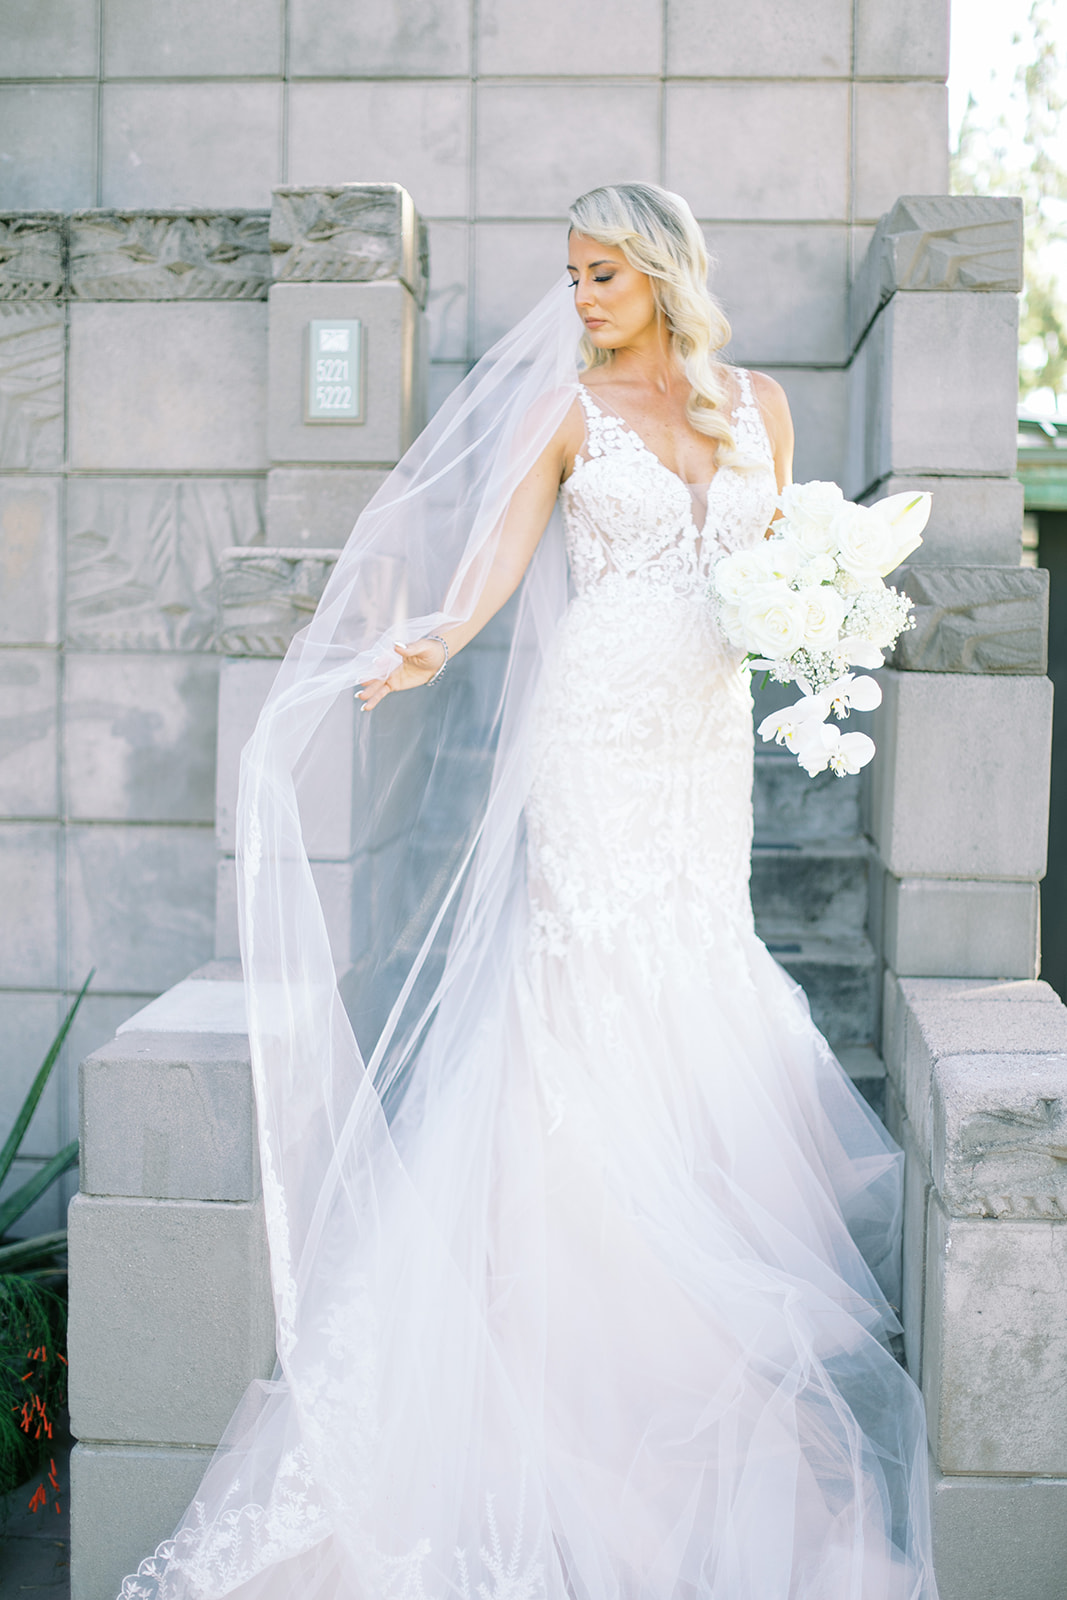 Bride standing on stairs of gray building holding out veil and bouquet, looking to side.